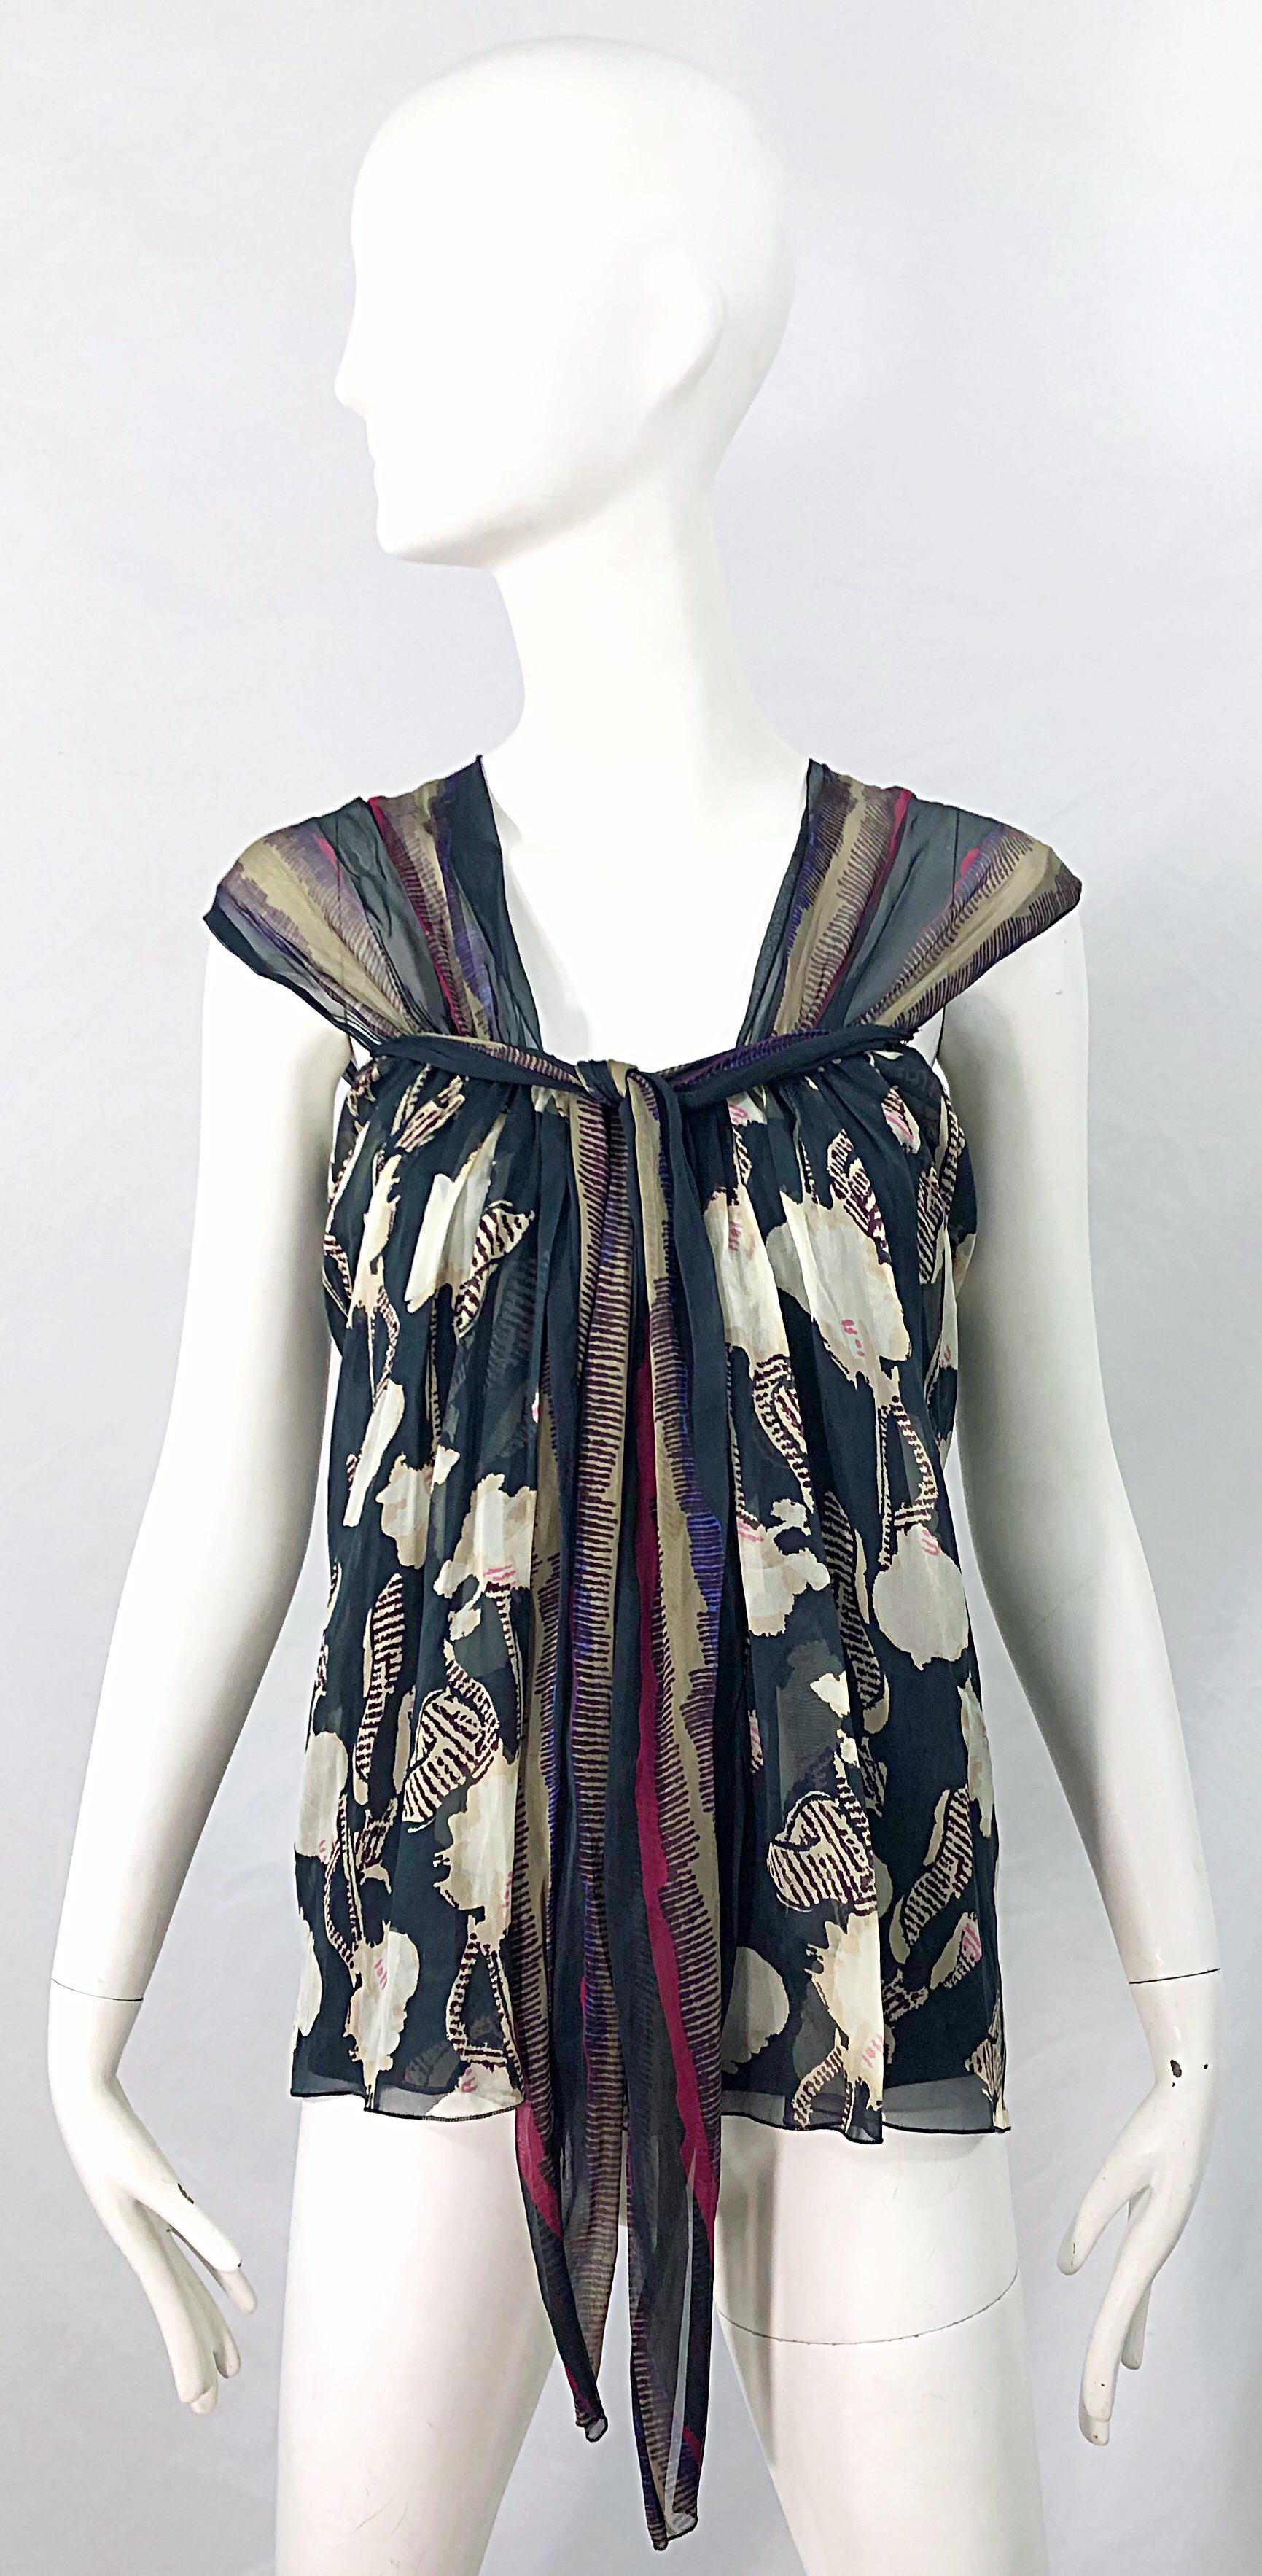 Beautiful vintage late 90s ALBERTA FERRETTI printed silk chiffon cap sleeve blouse / top ! Features grey, pink, purple, ivory and beige throughout. Hidden zipper up the back with hook-and-eye closure. Can easily be dressed up or down. Great with